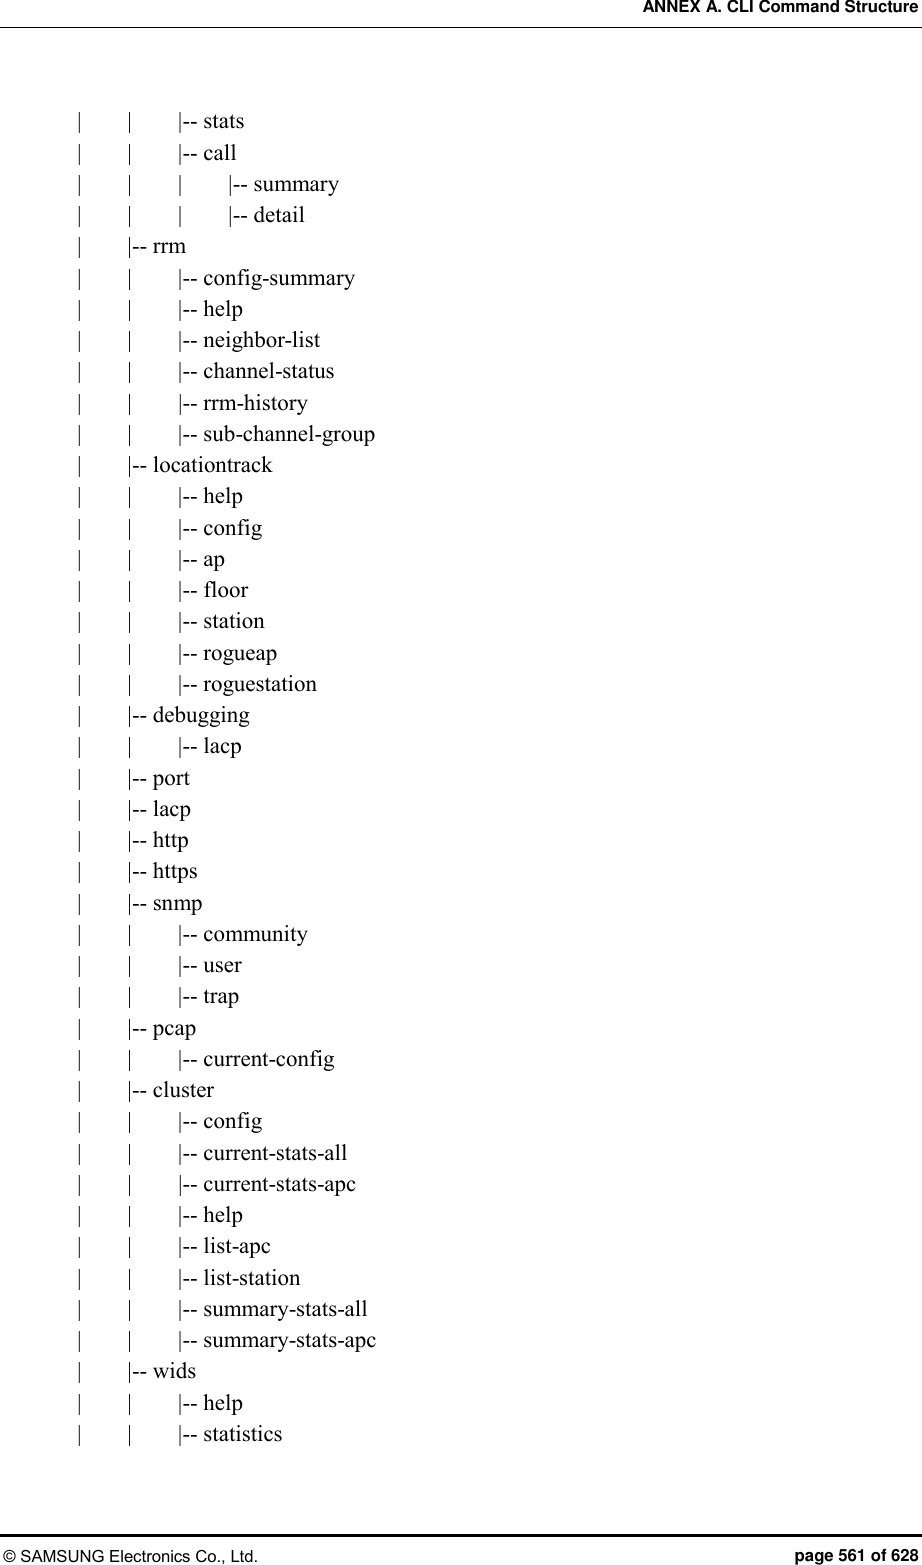 ANNEX A. CLI Command Structure © SAMSUNG Electronics Co., Ltd.  page 561 of 628 |        |        |-- stats |        |        |-- call |        |        |        |-- summary |        |        |        |-- detail |        |-- rrm |        |        |-- config-summary |        |        |-- help |        |        |-- neighbor-list |        |        |-- channel-status |        |      |-- rrm-history |        |        |-- sub-channel-group |        |-- locationtrack |        |        |-- help |        |        |-- config |        |        |-- ap |        |        |-- floor |        |        |-- station |        |        |-- rogueap |        |        |-- roguestation |        |-- debugging |        |        |-- lacp |        |-- port |        |-- lacp |        |-- http |        |-- https |        |-- snmp |        |        |-- community |        |        |-- user |        |        |-- trap |        |-- pcap |        |        |-- current-config |        |-- cluster |        |        |-- config |        |        |-- current-stats-all |        |     |-- current-stats-apc |        |        |-- help |        |        |-- list-apc |        |        |-- list-station |        |        |-- summary-stats-all |        |        |-- summary-stats-apc |        |-- wids |        |        |-- help |        |        |-- statistics 